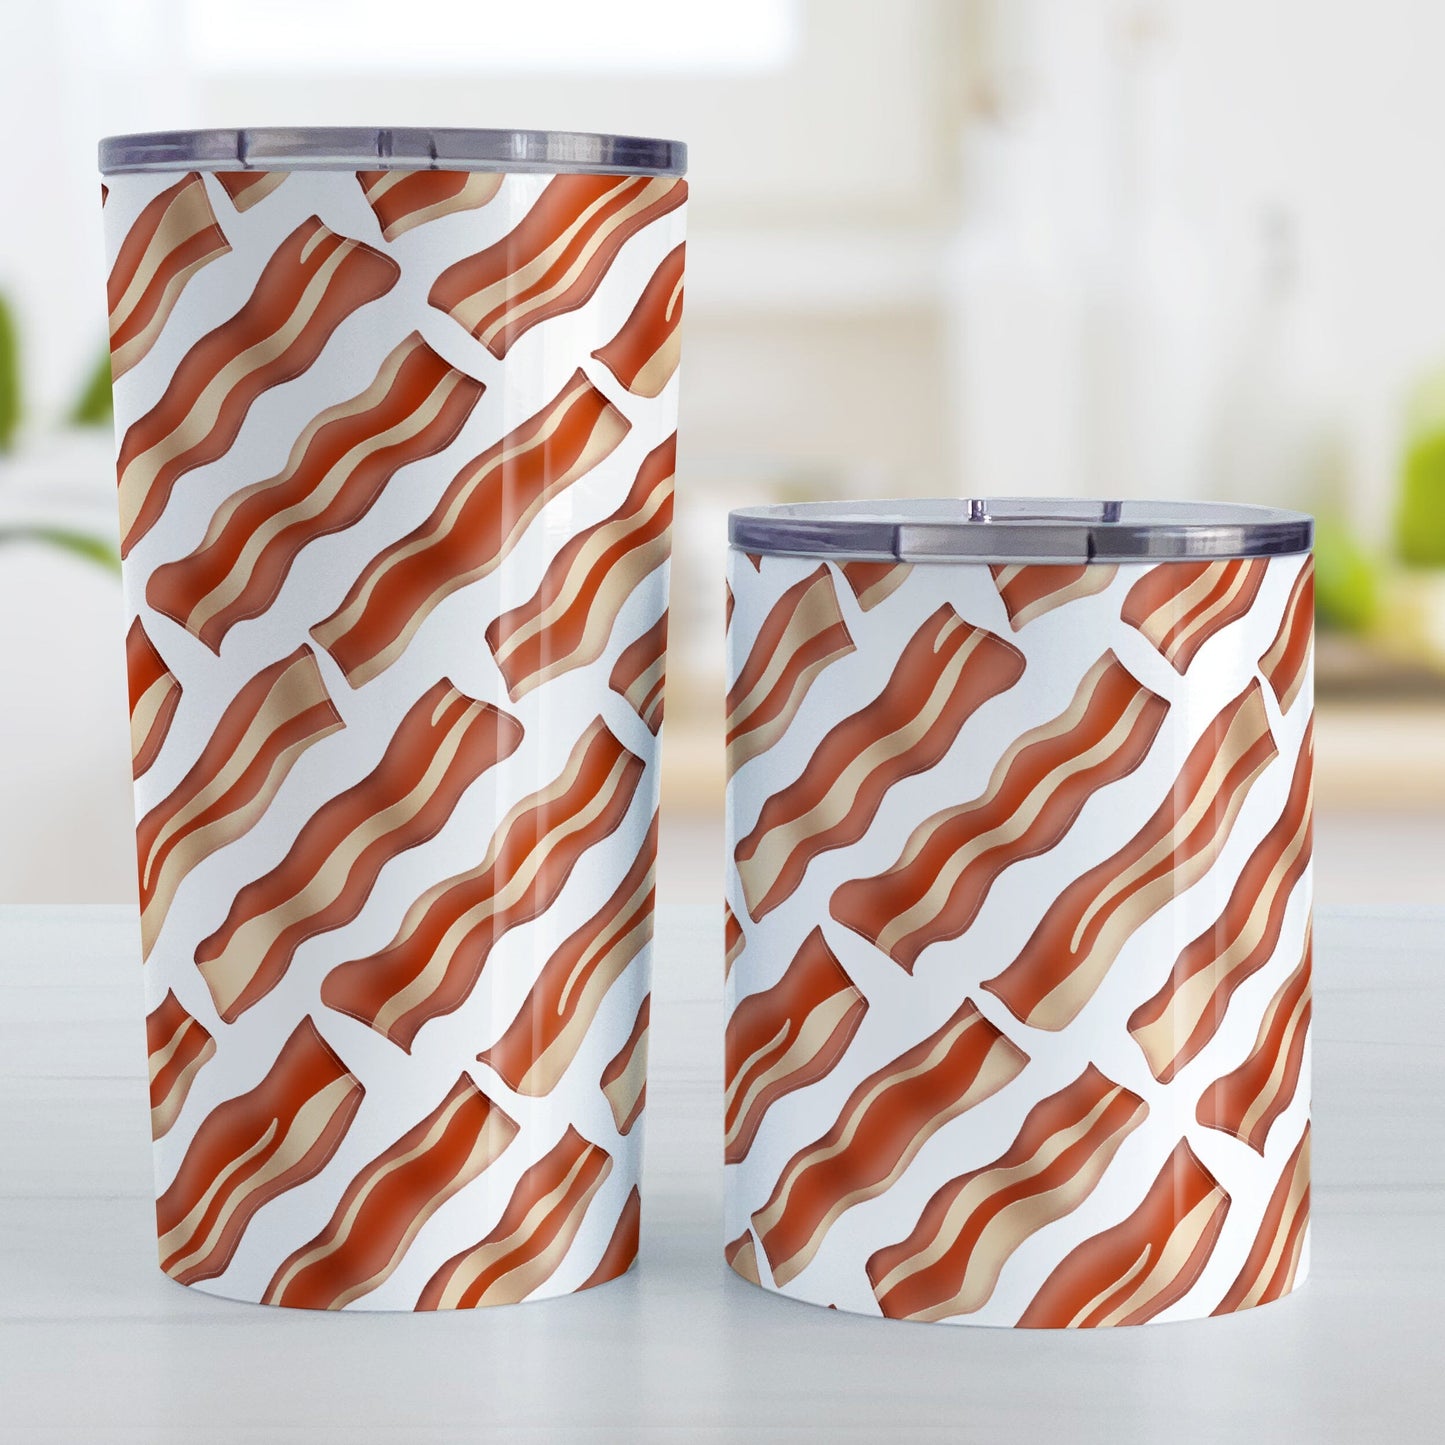 Bacon Pattern Tumbler Cup (20oz or 10oz) at Amy's Coffee Mugs. Stainless steel tumbler cups designed with a diagonal pattern of bacon strips that wraps around the cups. They're perfect for anyone who loves bacon and wants a breakfast-themed cup with their morning meal or while they're at work. Photo shows both sized cups on a table next to each other.